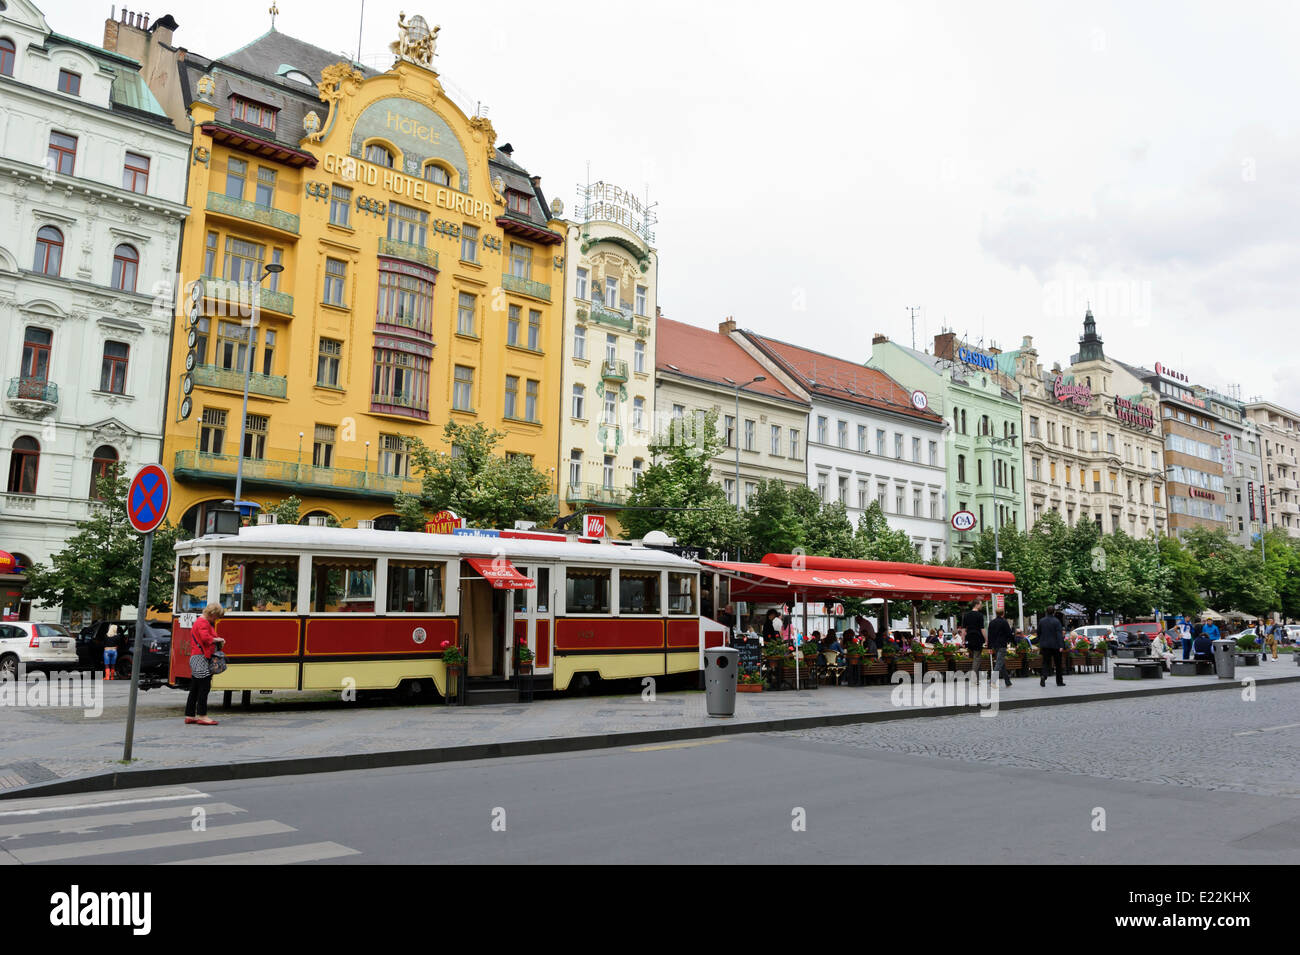 An old vintage tram converted to a restaurant in the middle of Wenceslas Square, Prague, czech Republic. Stock Photo